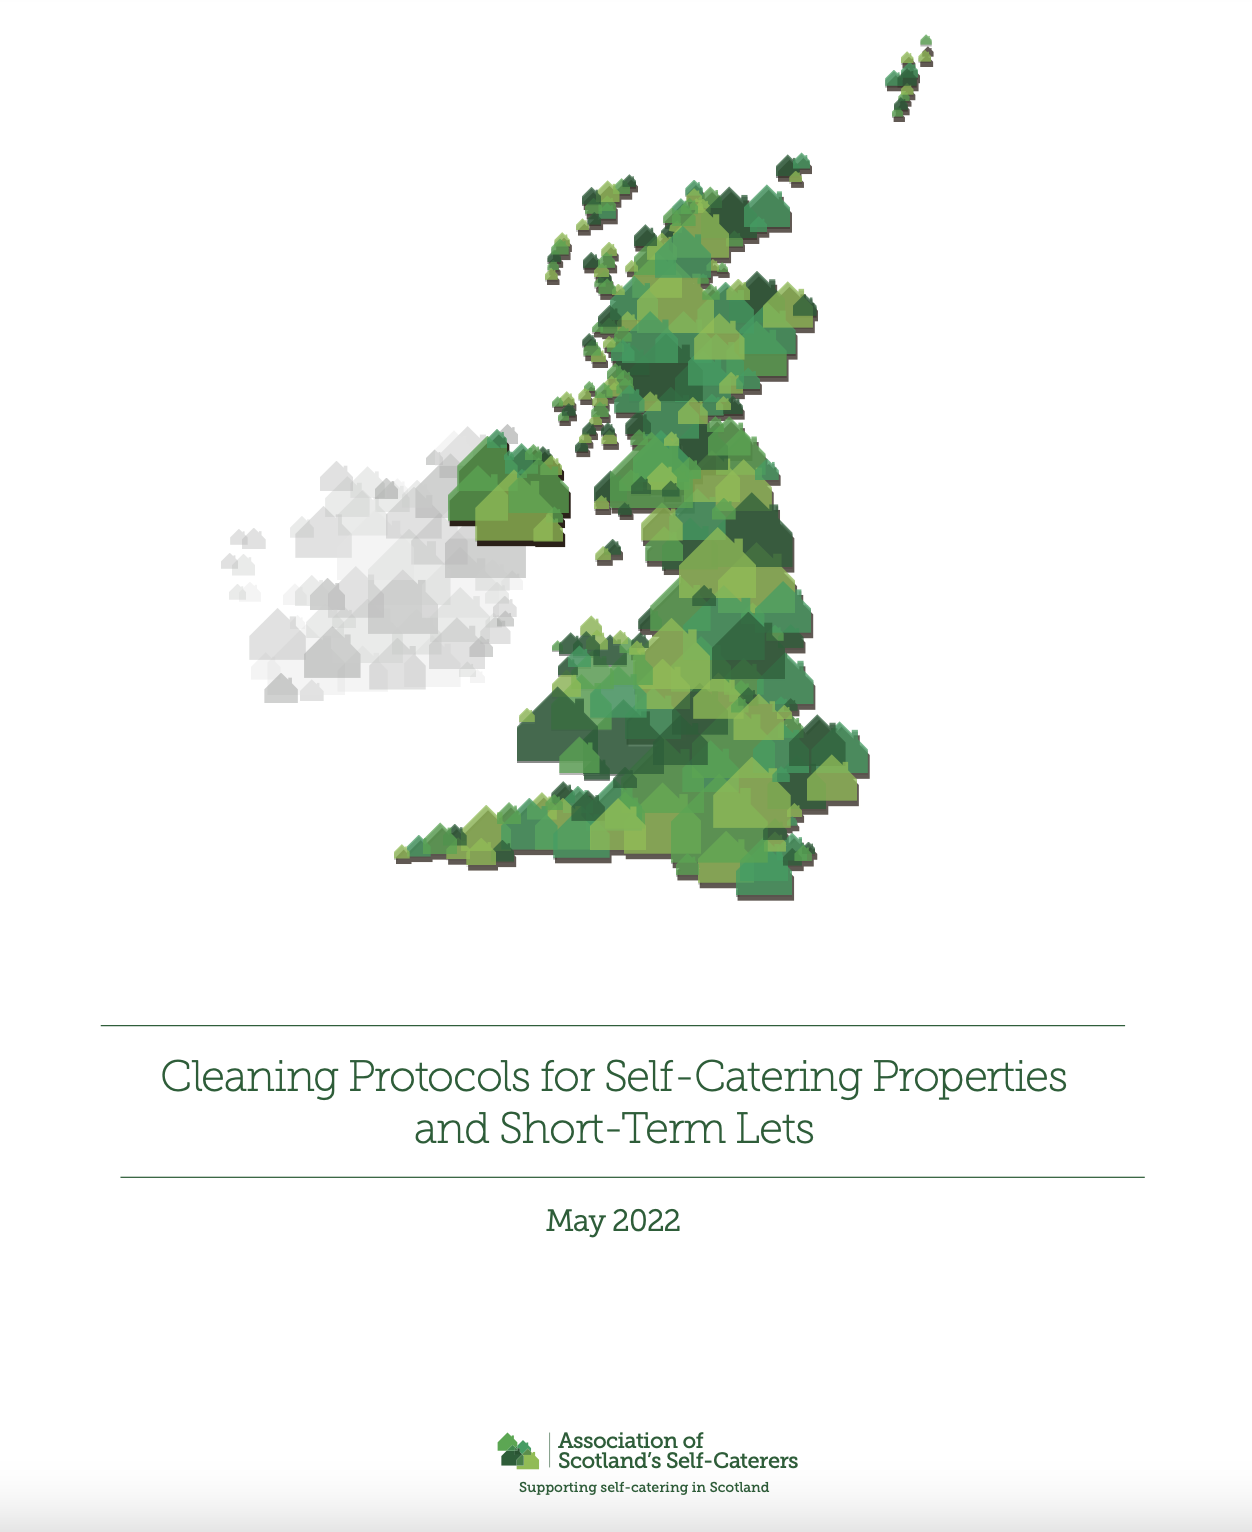 Updated Cleaning Protocols and Sectoral Guidance for Self-Catering Properties and Short-Term Lets